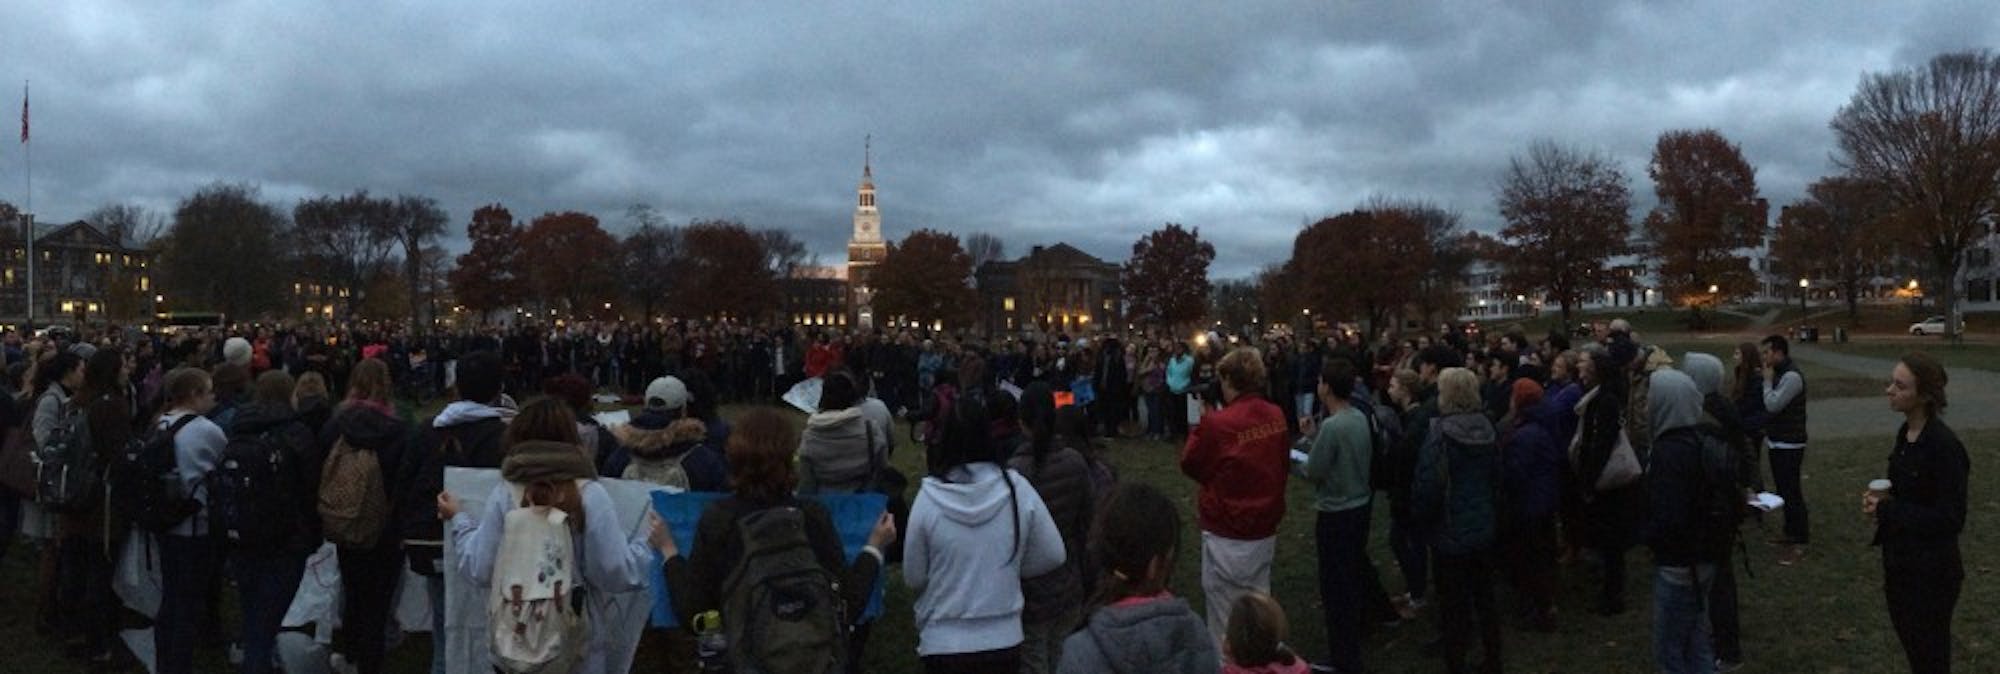 Around 300 students, faculty and Upper Valley community members gather on the Green to express solidarity against the election of Donald Trump